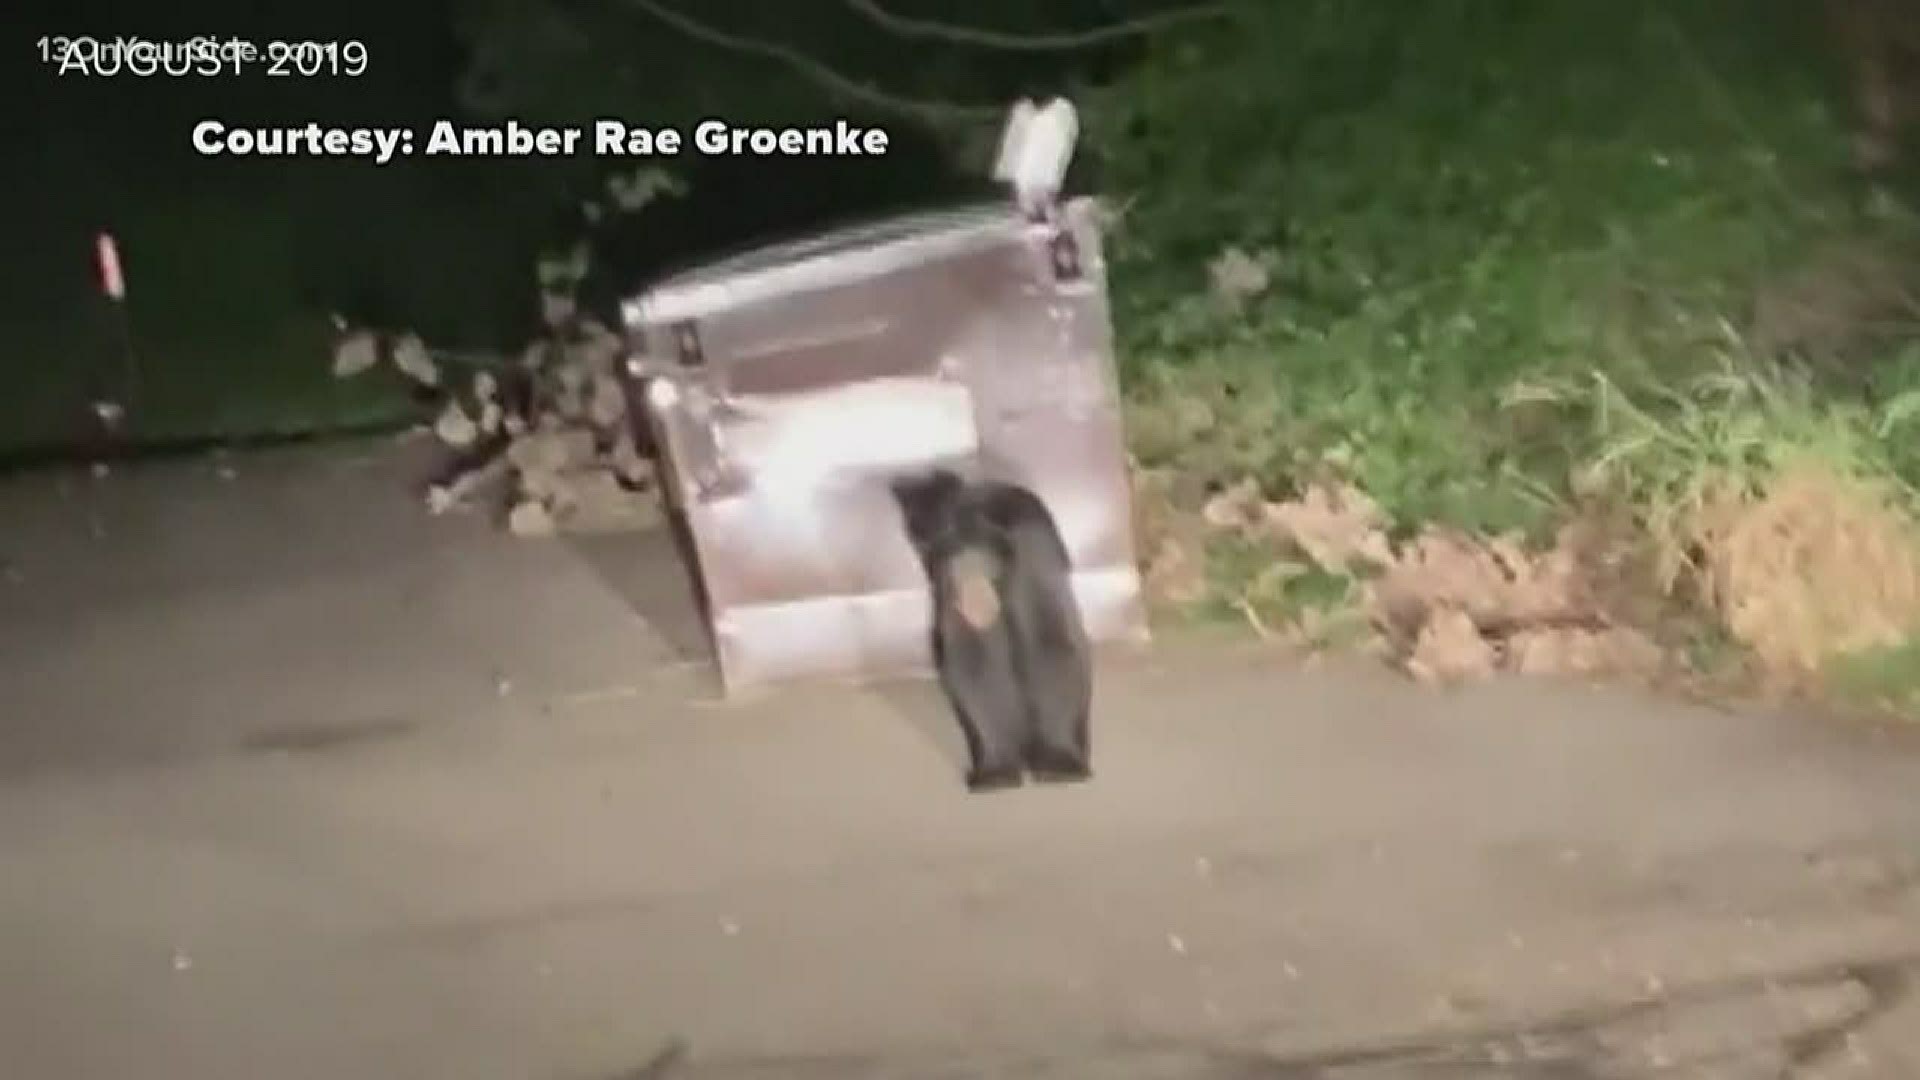 A black bear that became somewhat of a local internet sensation was struck and killed this morning in the city of Walker.